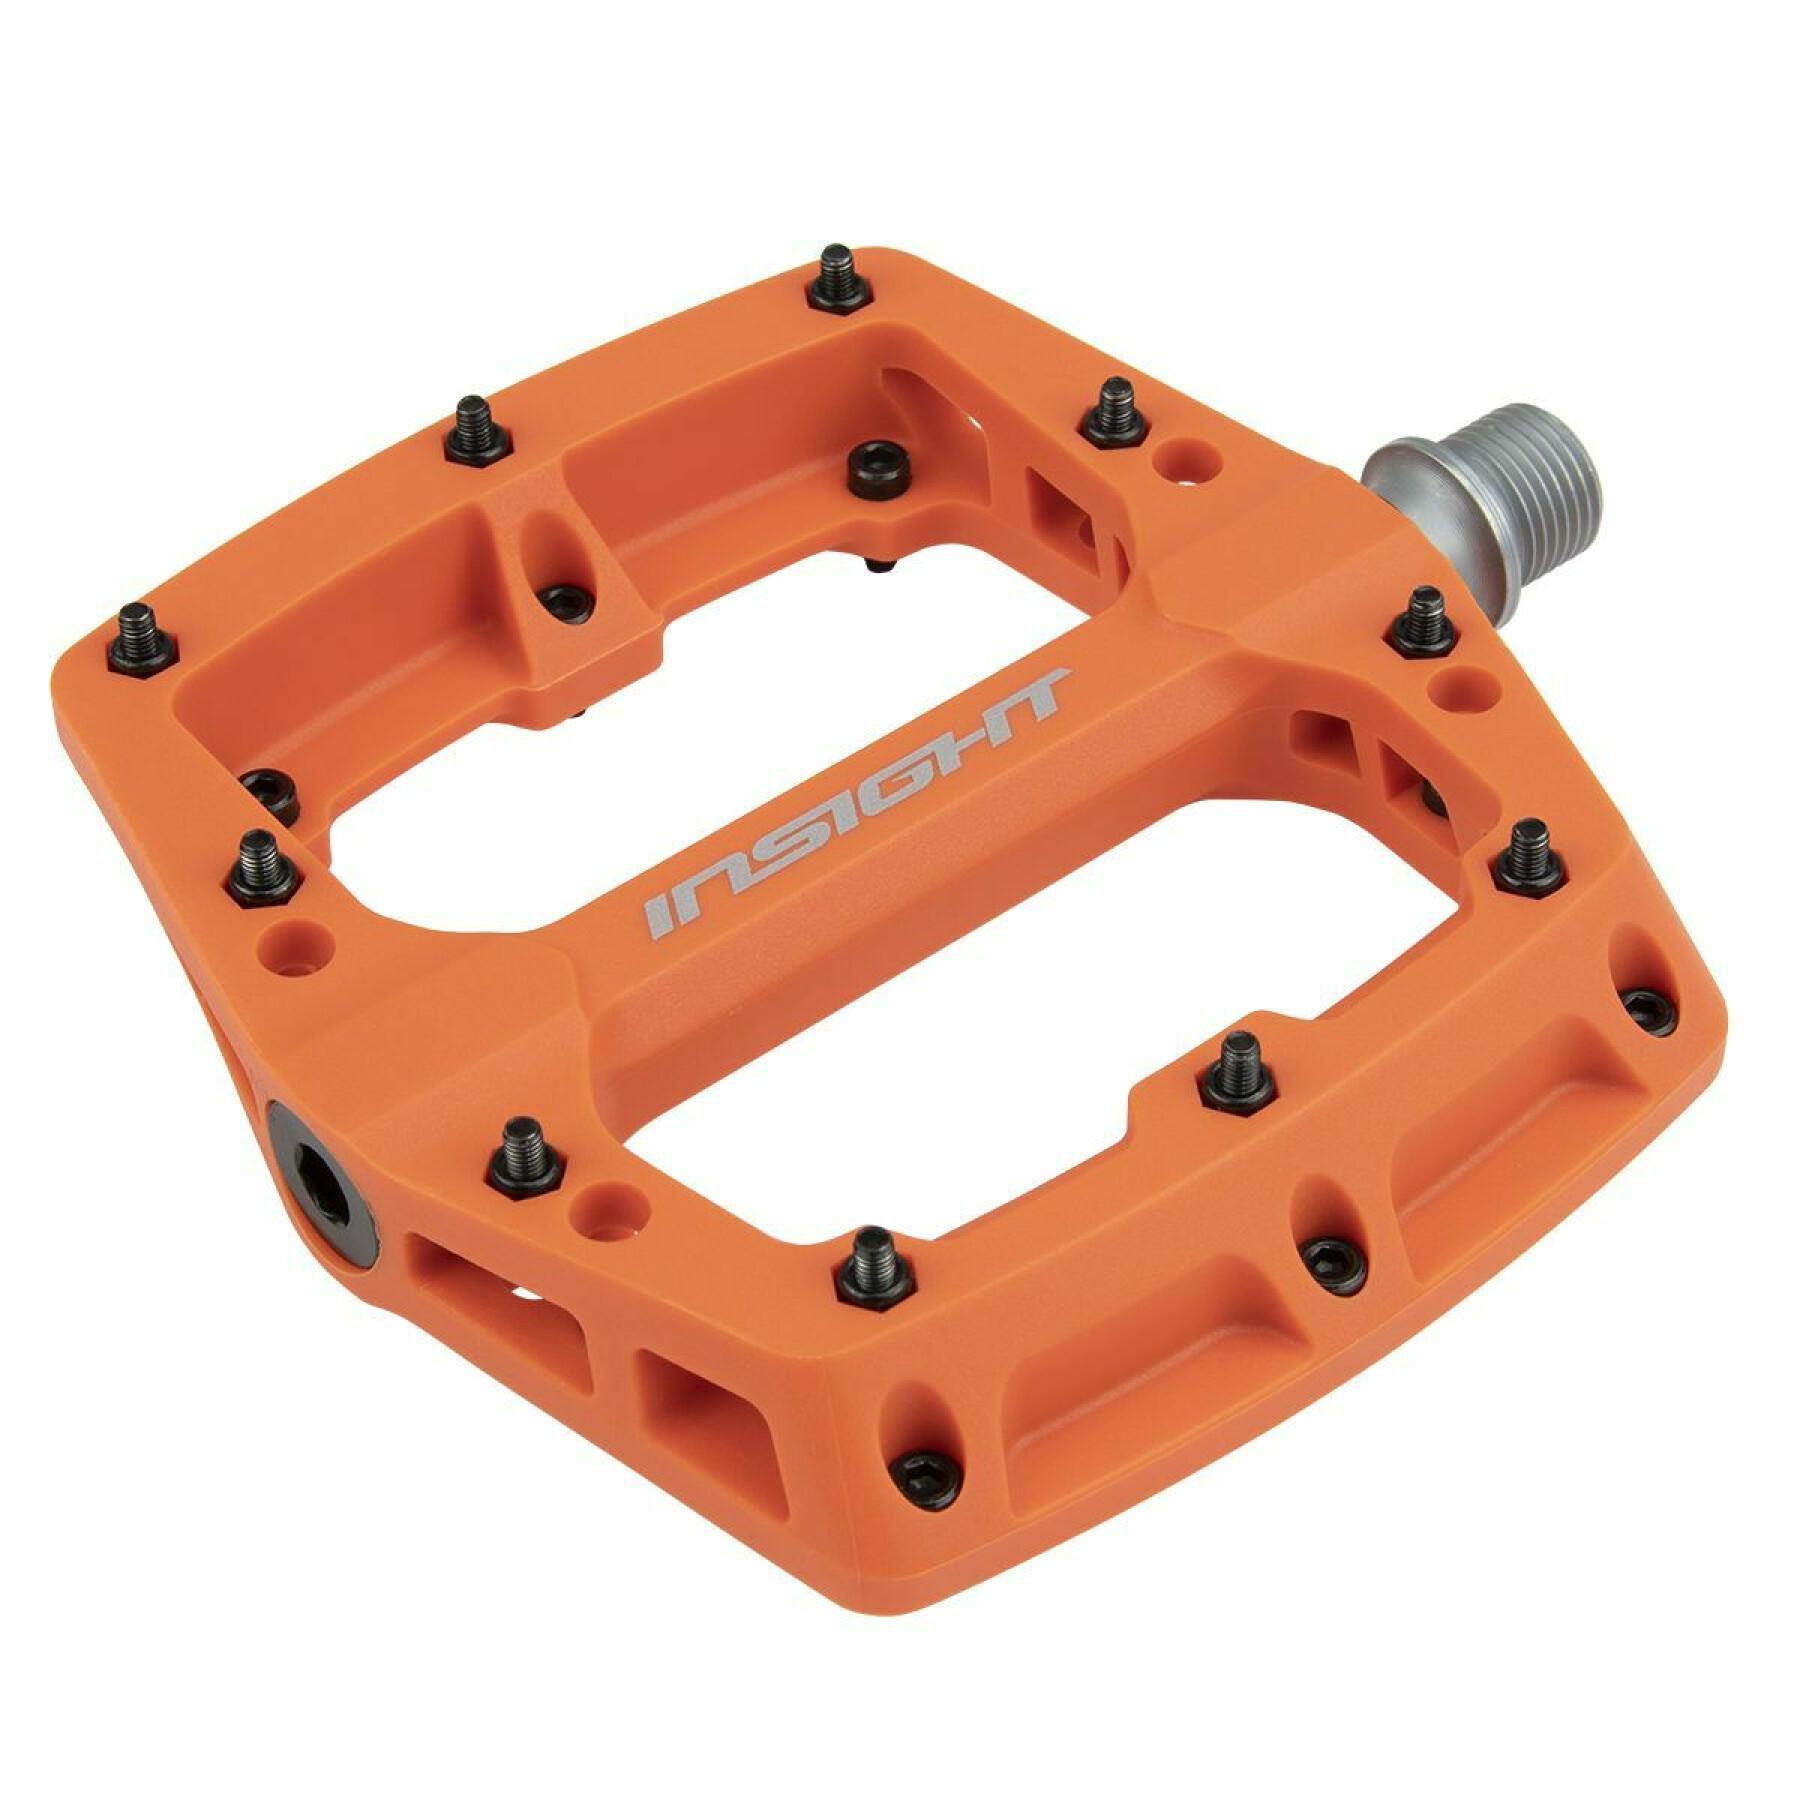 Thermoplastic pedals Insight